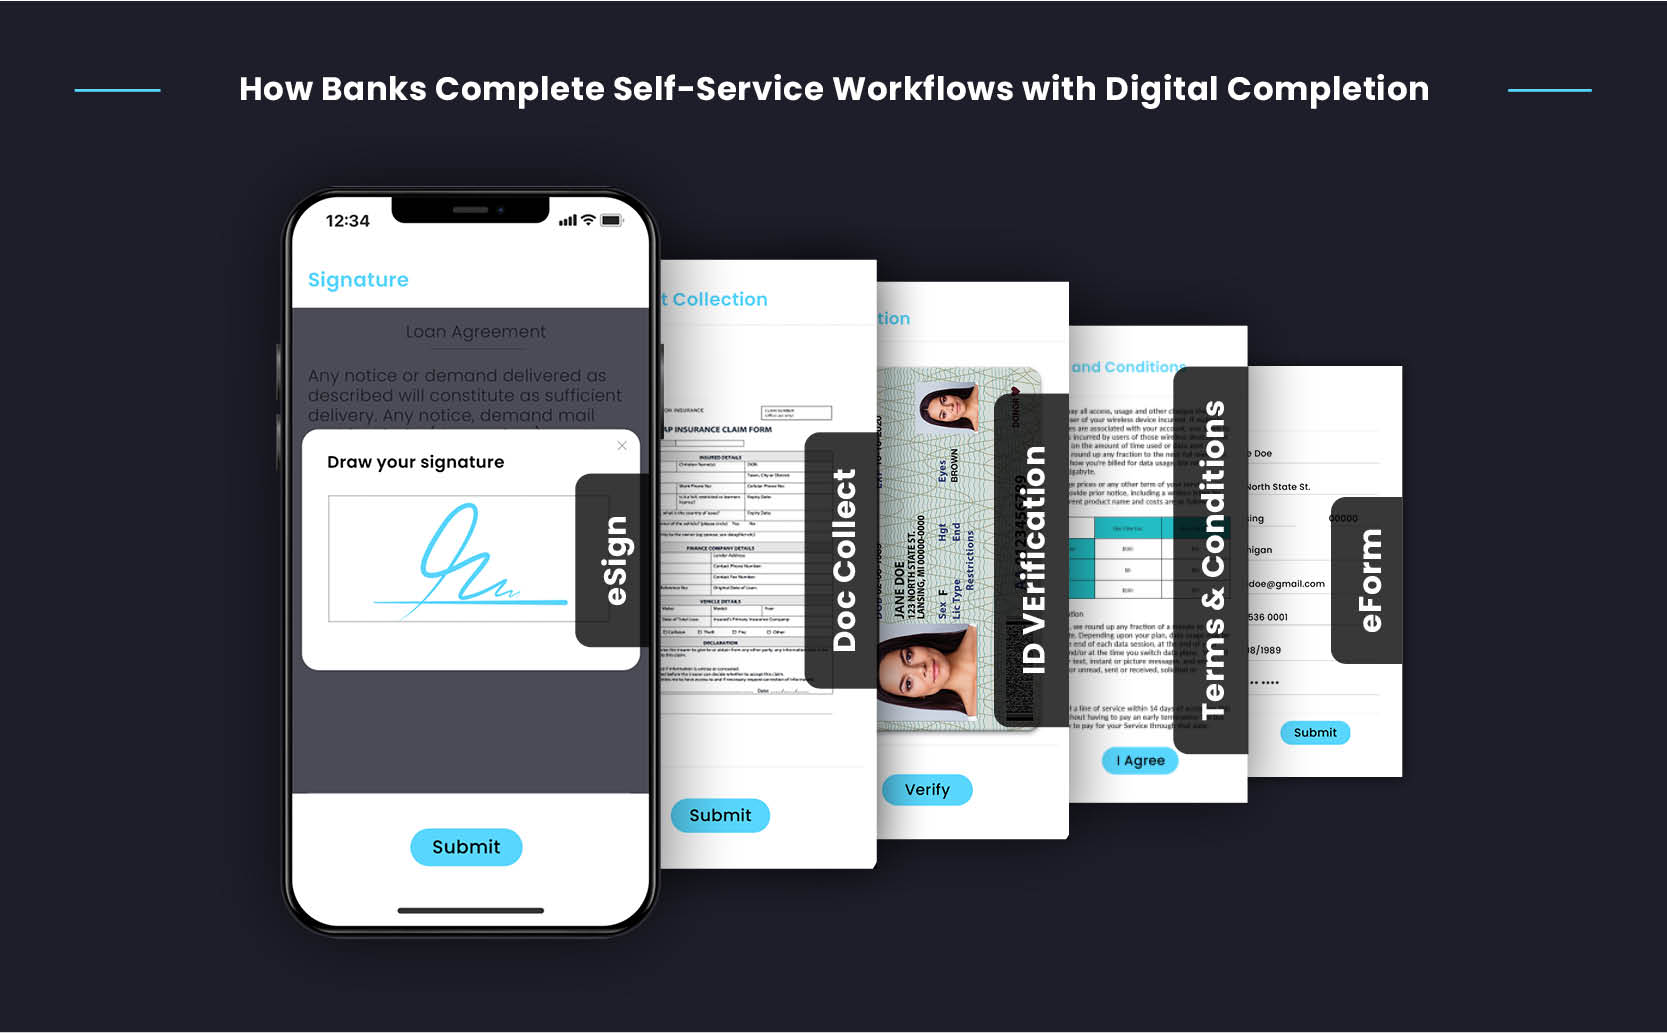 How Banks Complete Self-Service Workflows with Digital Completion